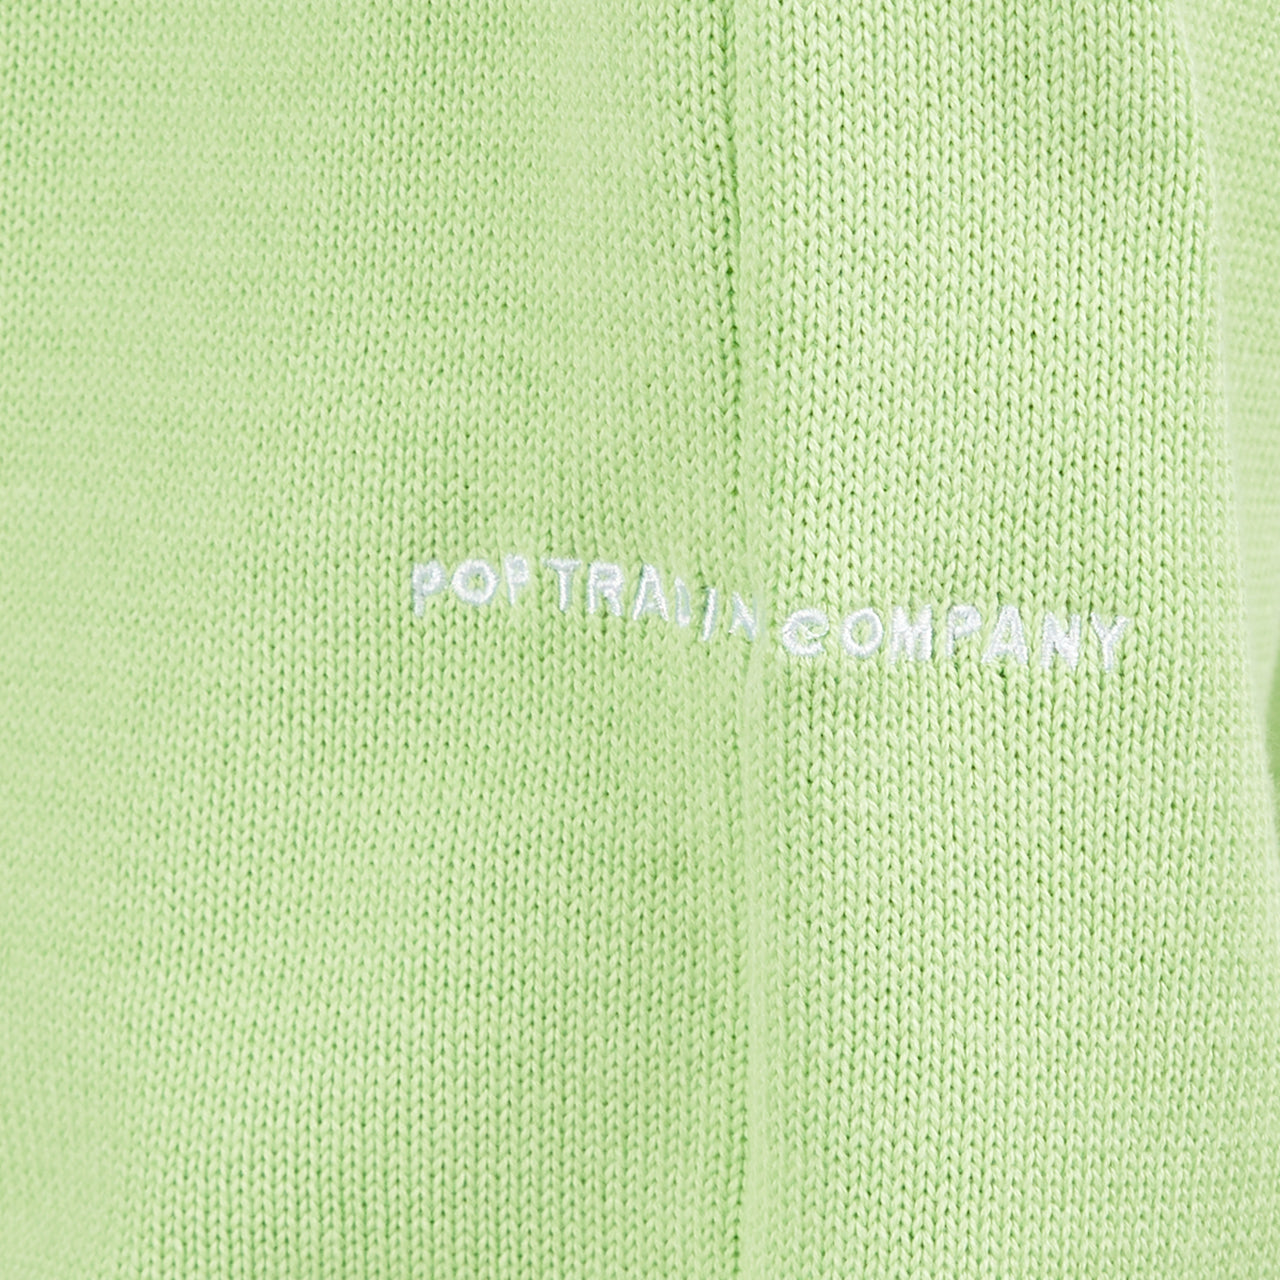 Pop Trading Company Arch Knitted Crewneck (Neon)  - Allike Store